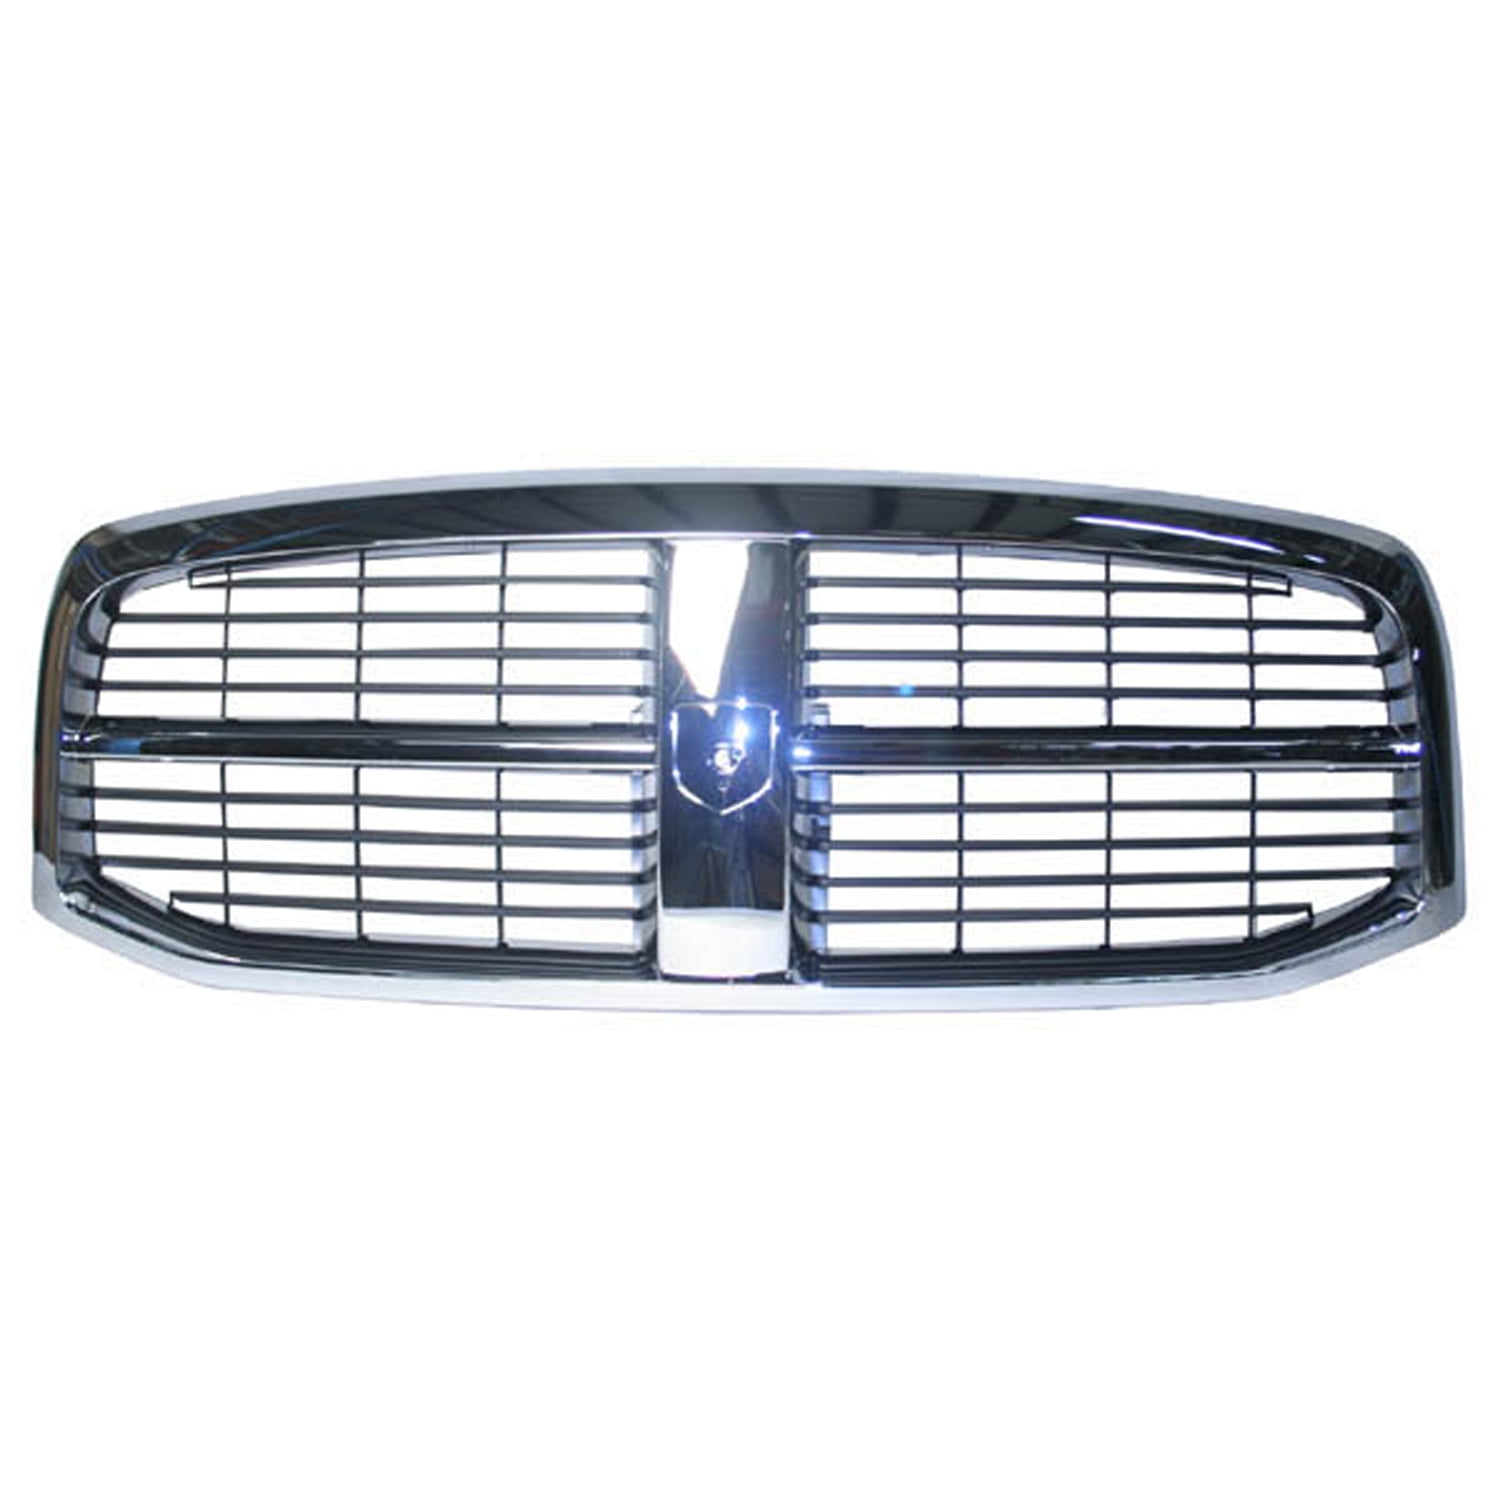 Action Crash Parts, New Standard Replacement Front Grille, Fits 2006-2008 Dodge Ram 1500 2008 Dodge Ram 1500 Front Grill Replacement